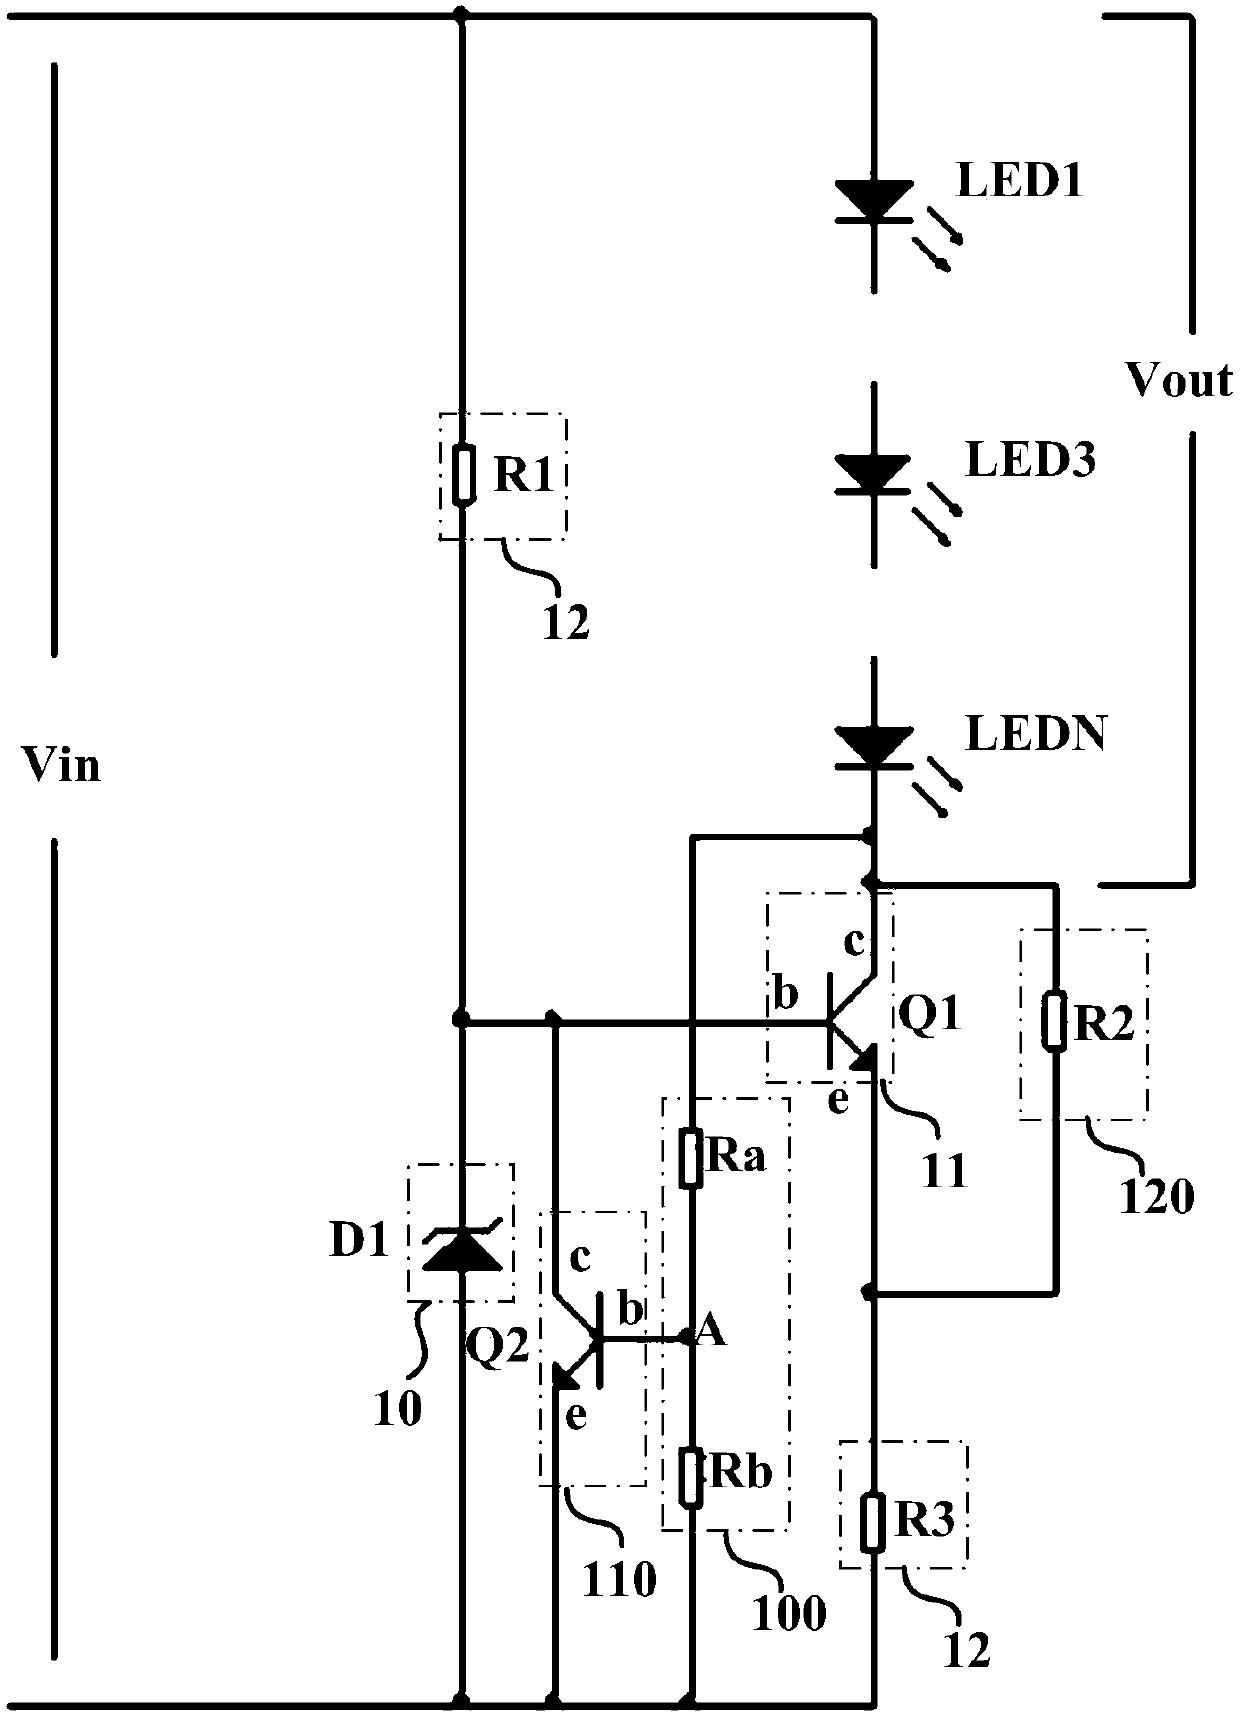 Linear constant current circuit for overvoltage protection